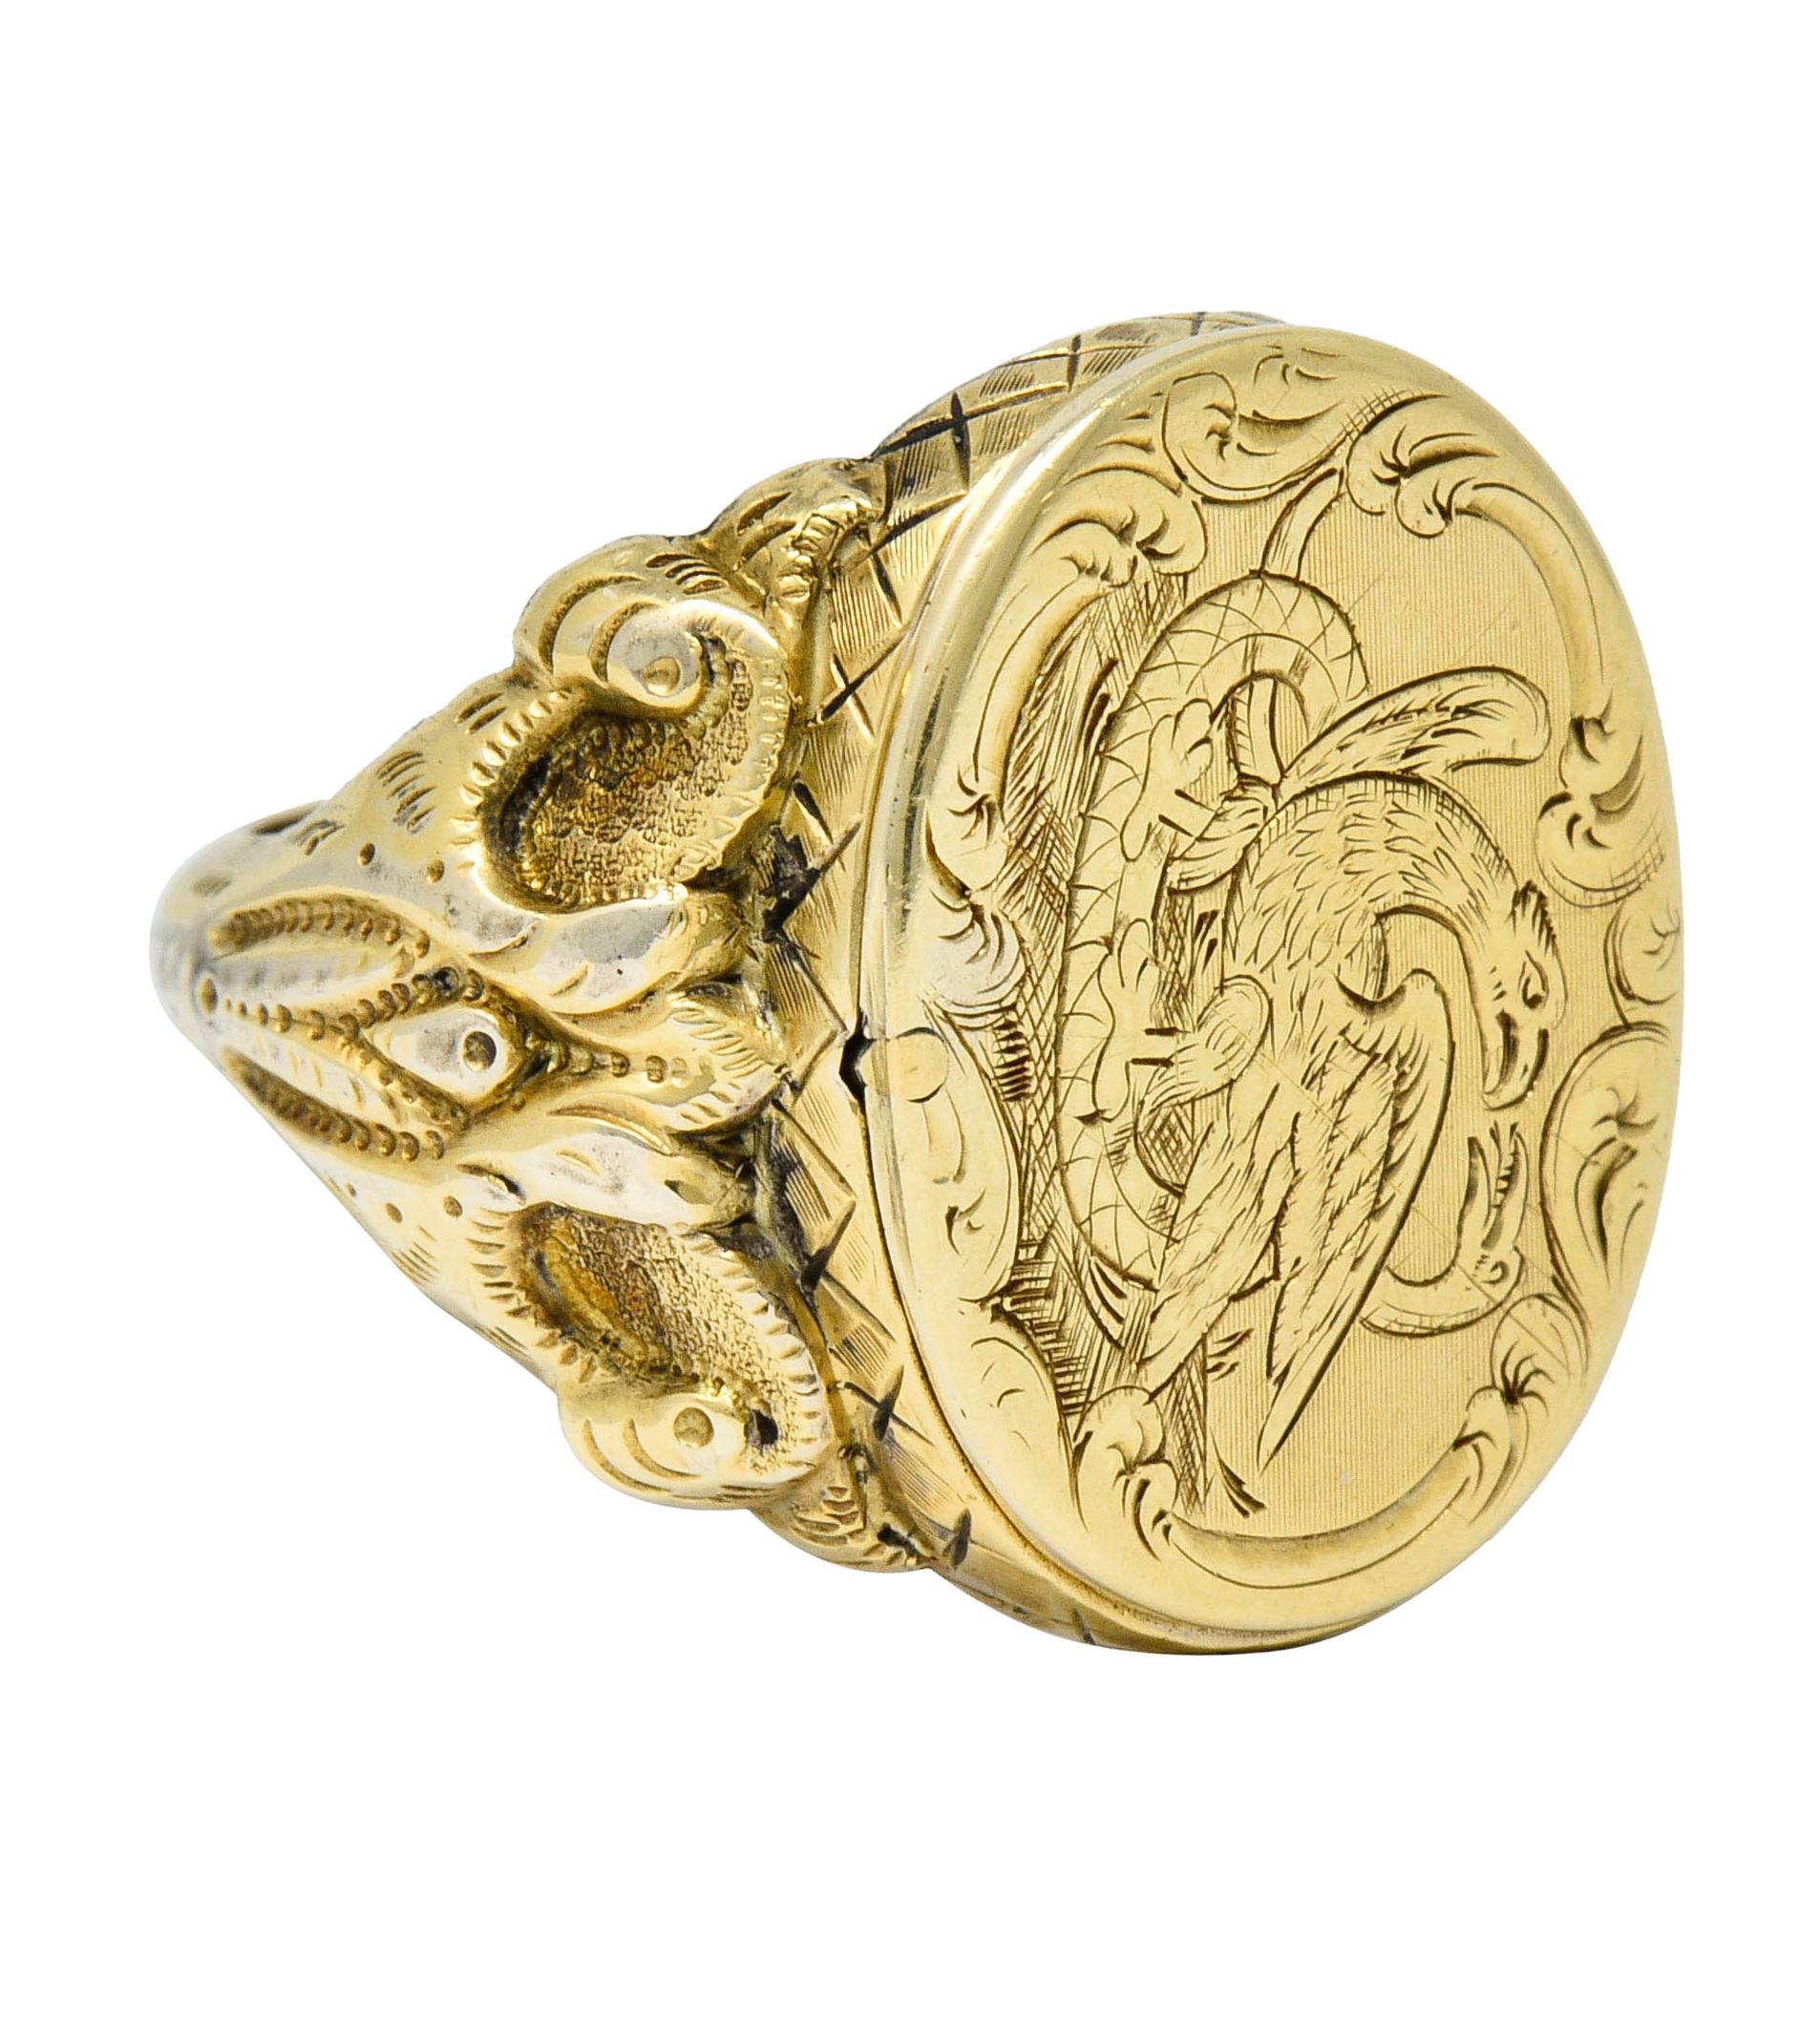 Signet style ring with a deeply engraved oval face

Depicting a stylized eagle with spread wings trampling a vicious snake

Neoclassical and symbolic indicative of good triumphing evil with the eagle strongly associated to divine justice

Image is